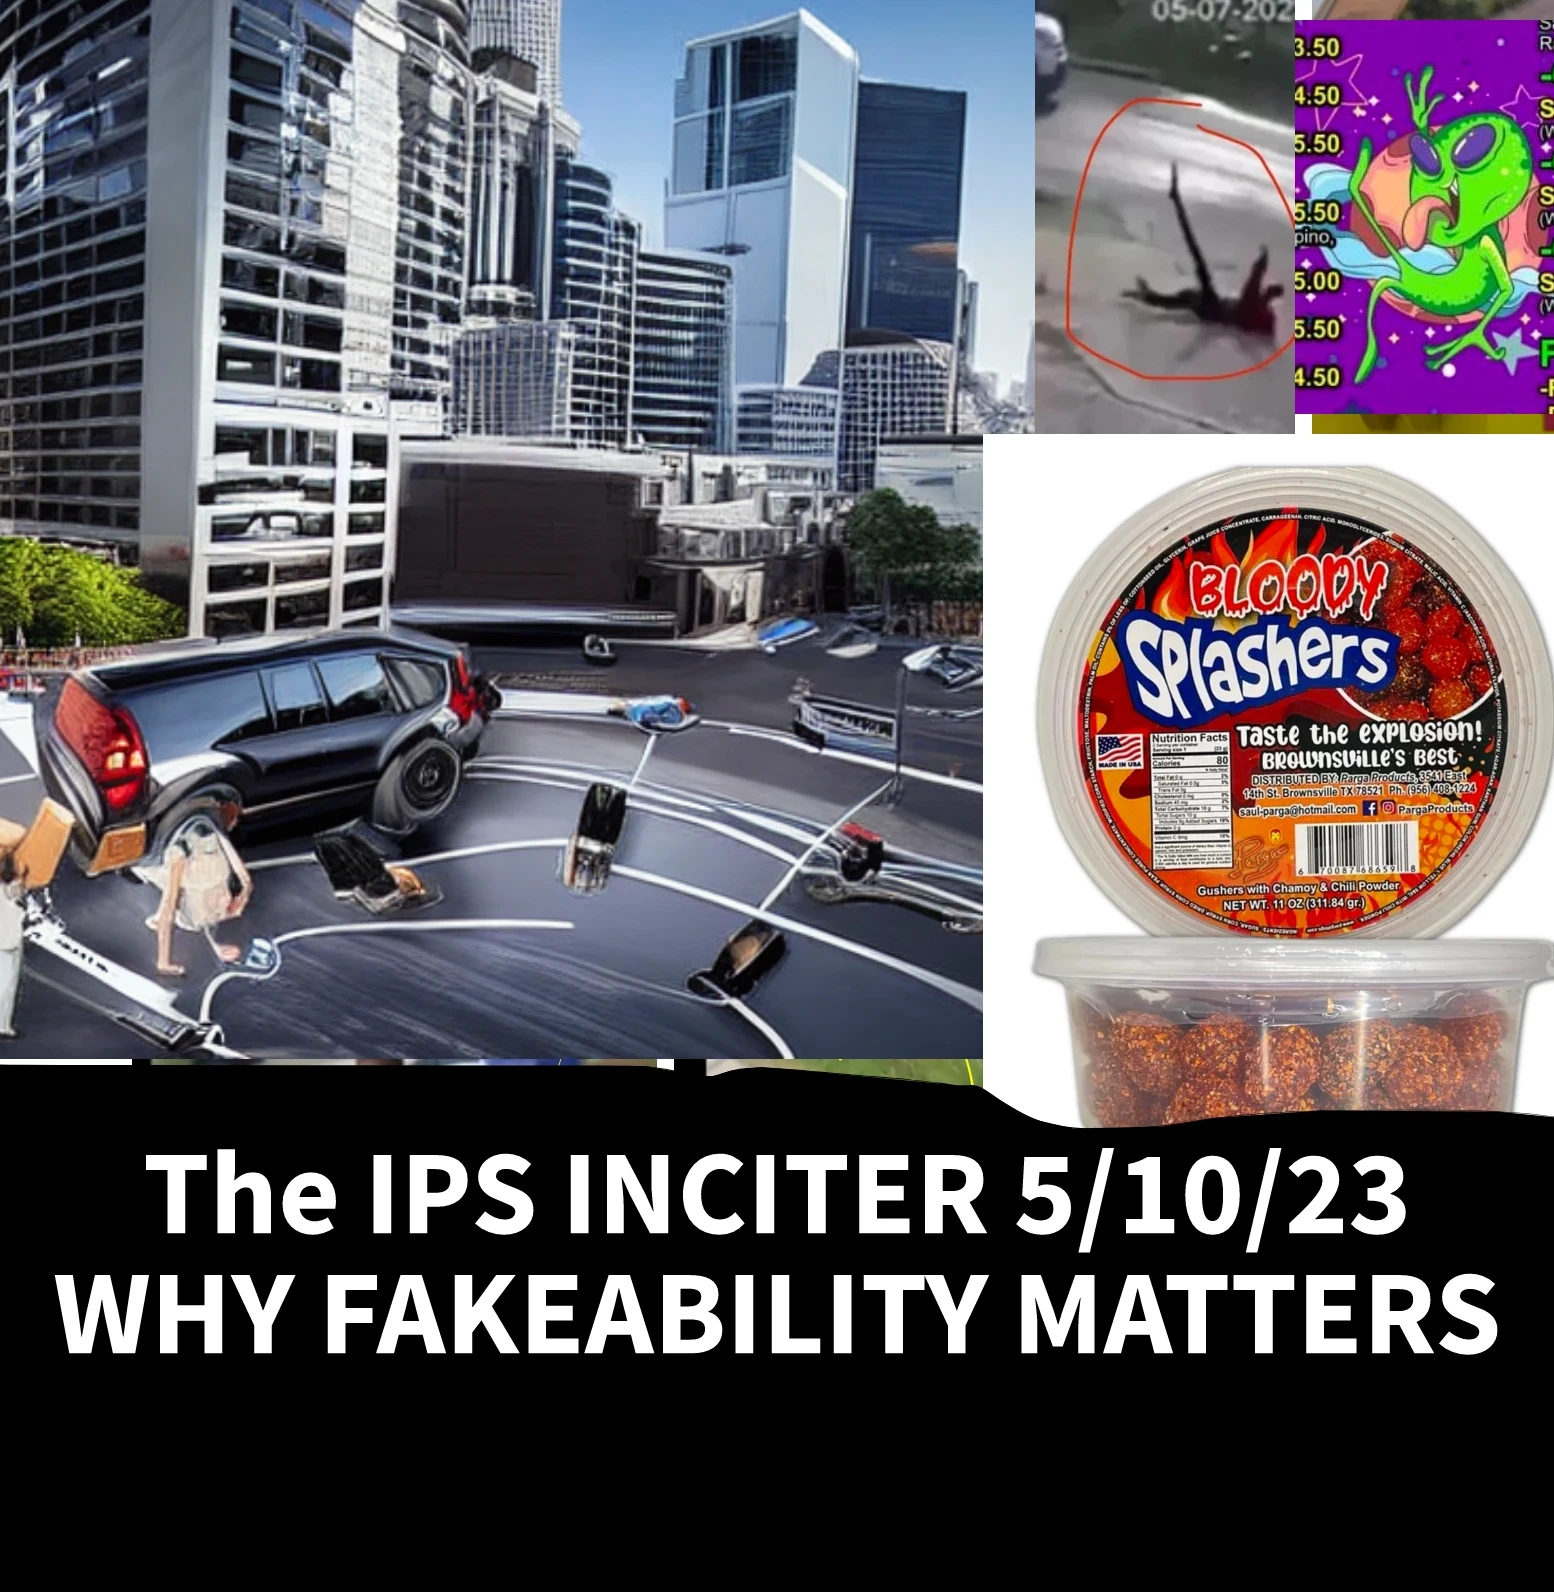 ''Why Fakebility Matters'' The IPS Inciter 5/10/23